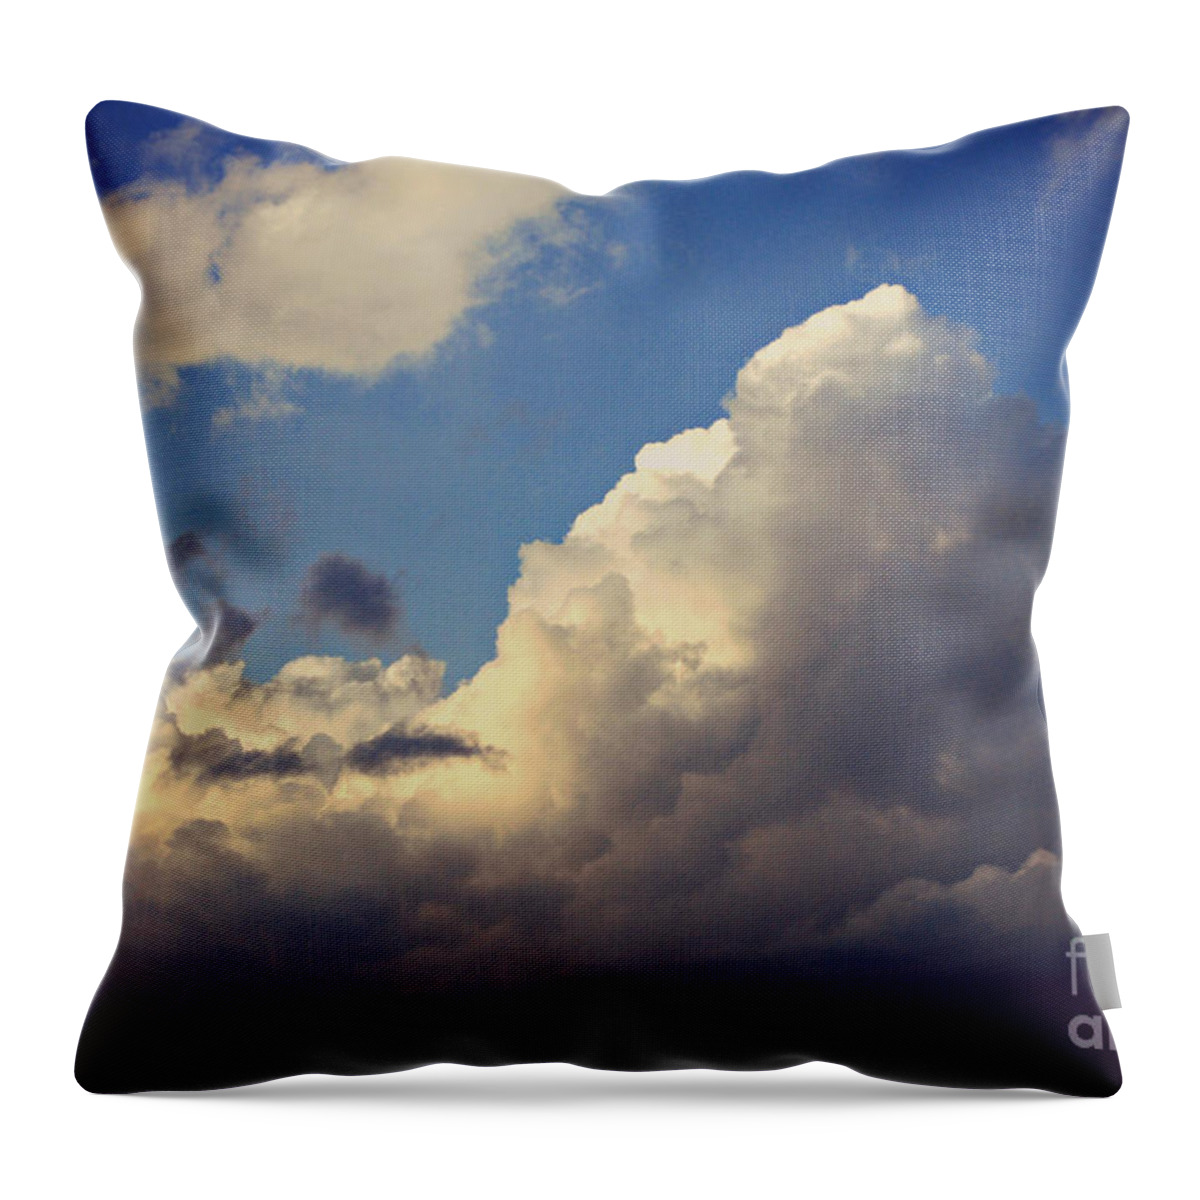 Clouds Throw Pillow featuring the photograph Clouds-3 by Paulette B Wright